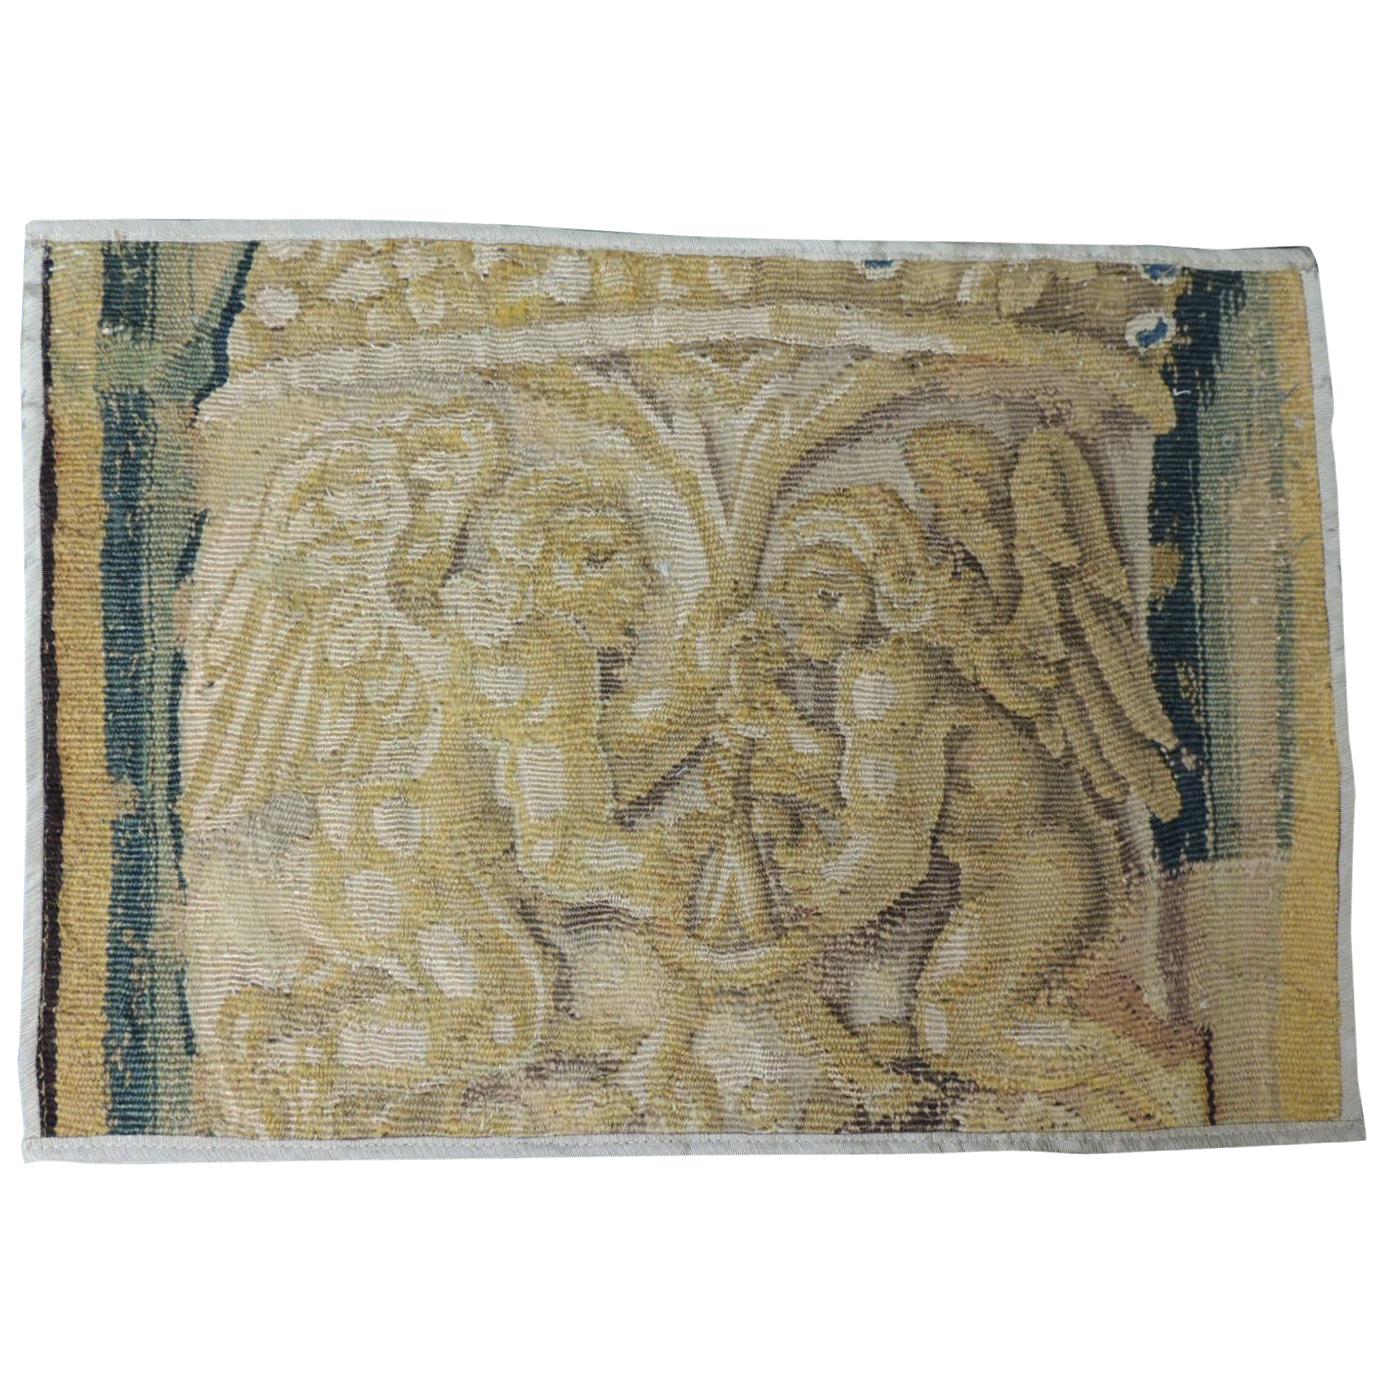 19th Century Green and Gold Verdure Tapestry Fragment